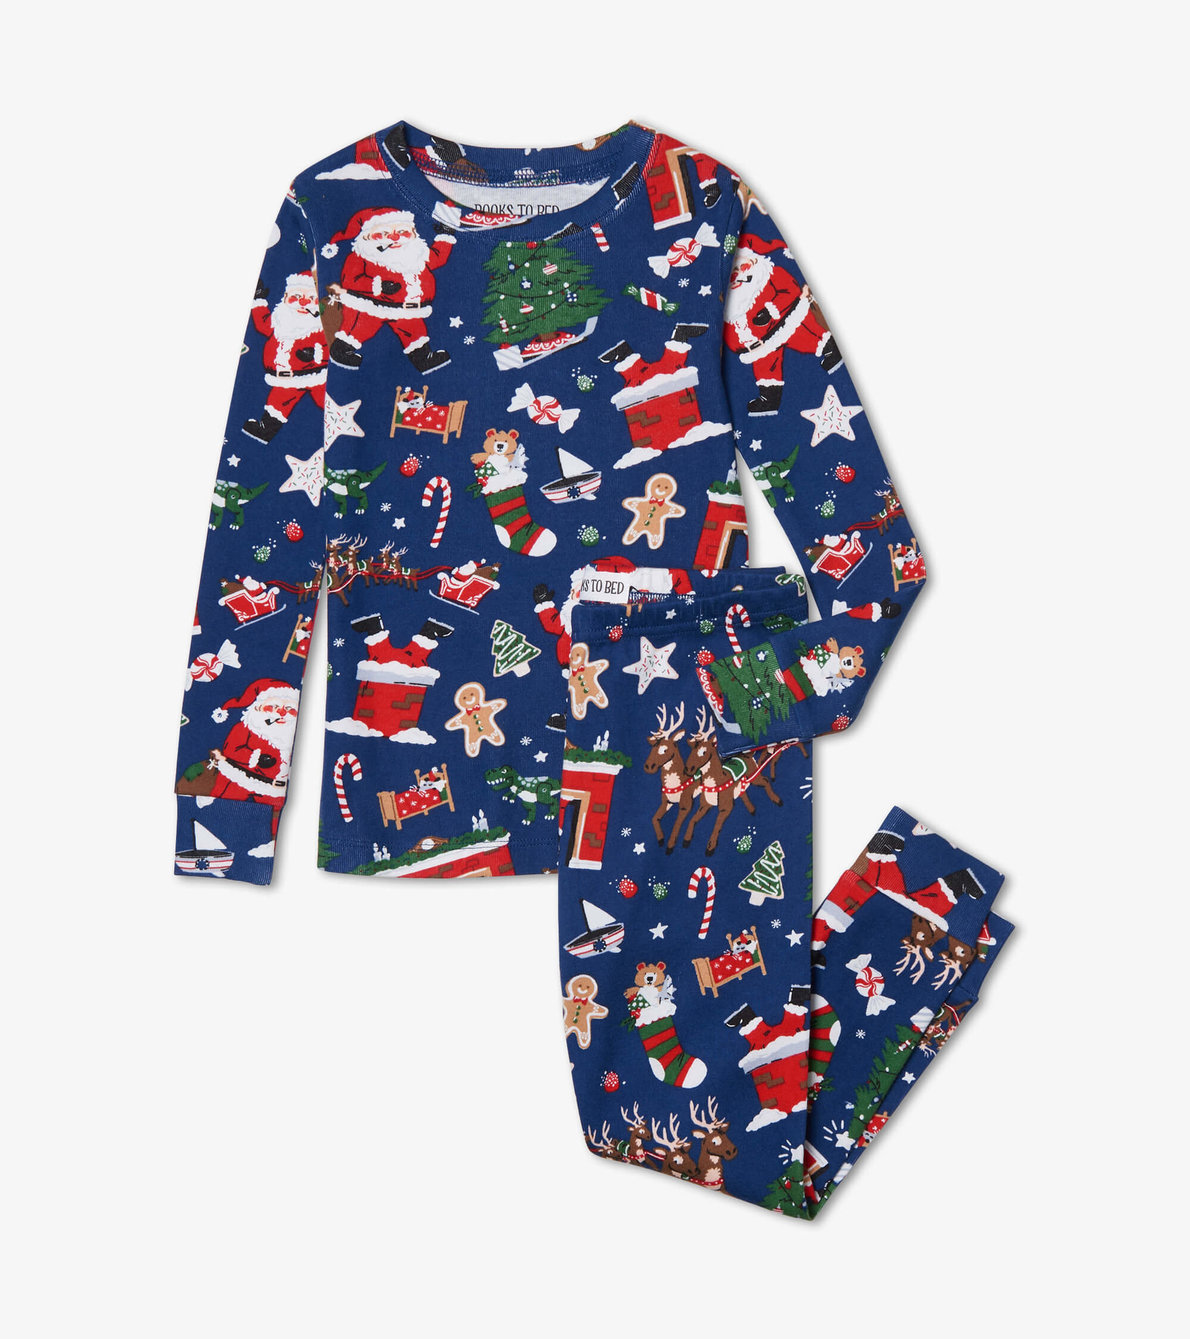 View larger image of Twas the Night Before Christmas Blue Pajama Set